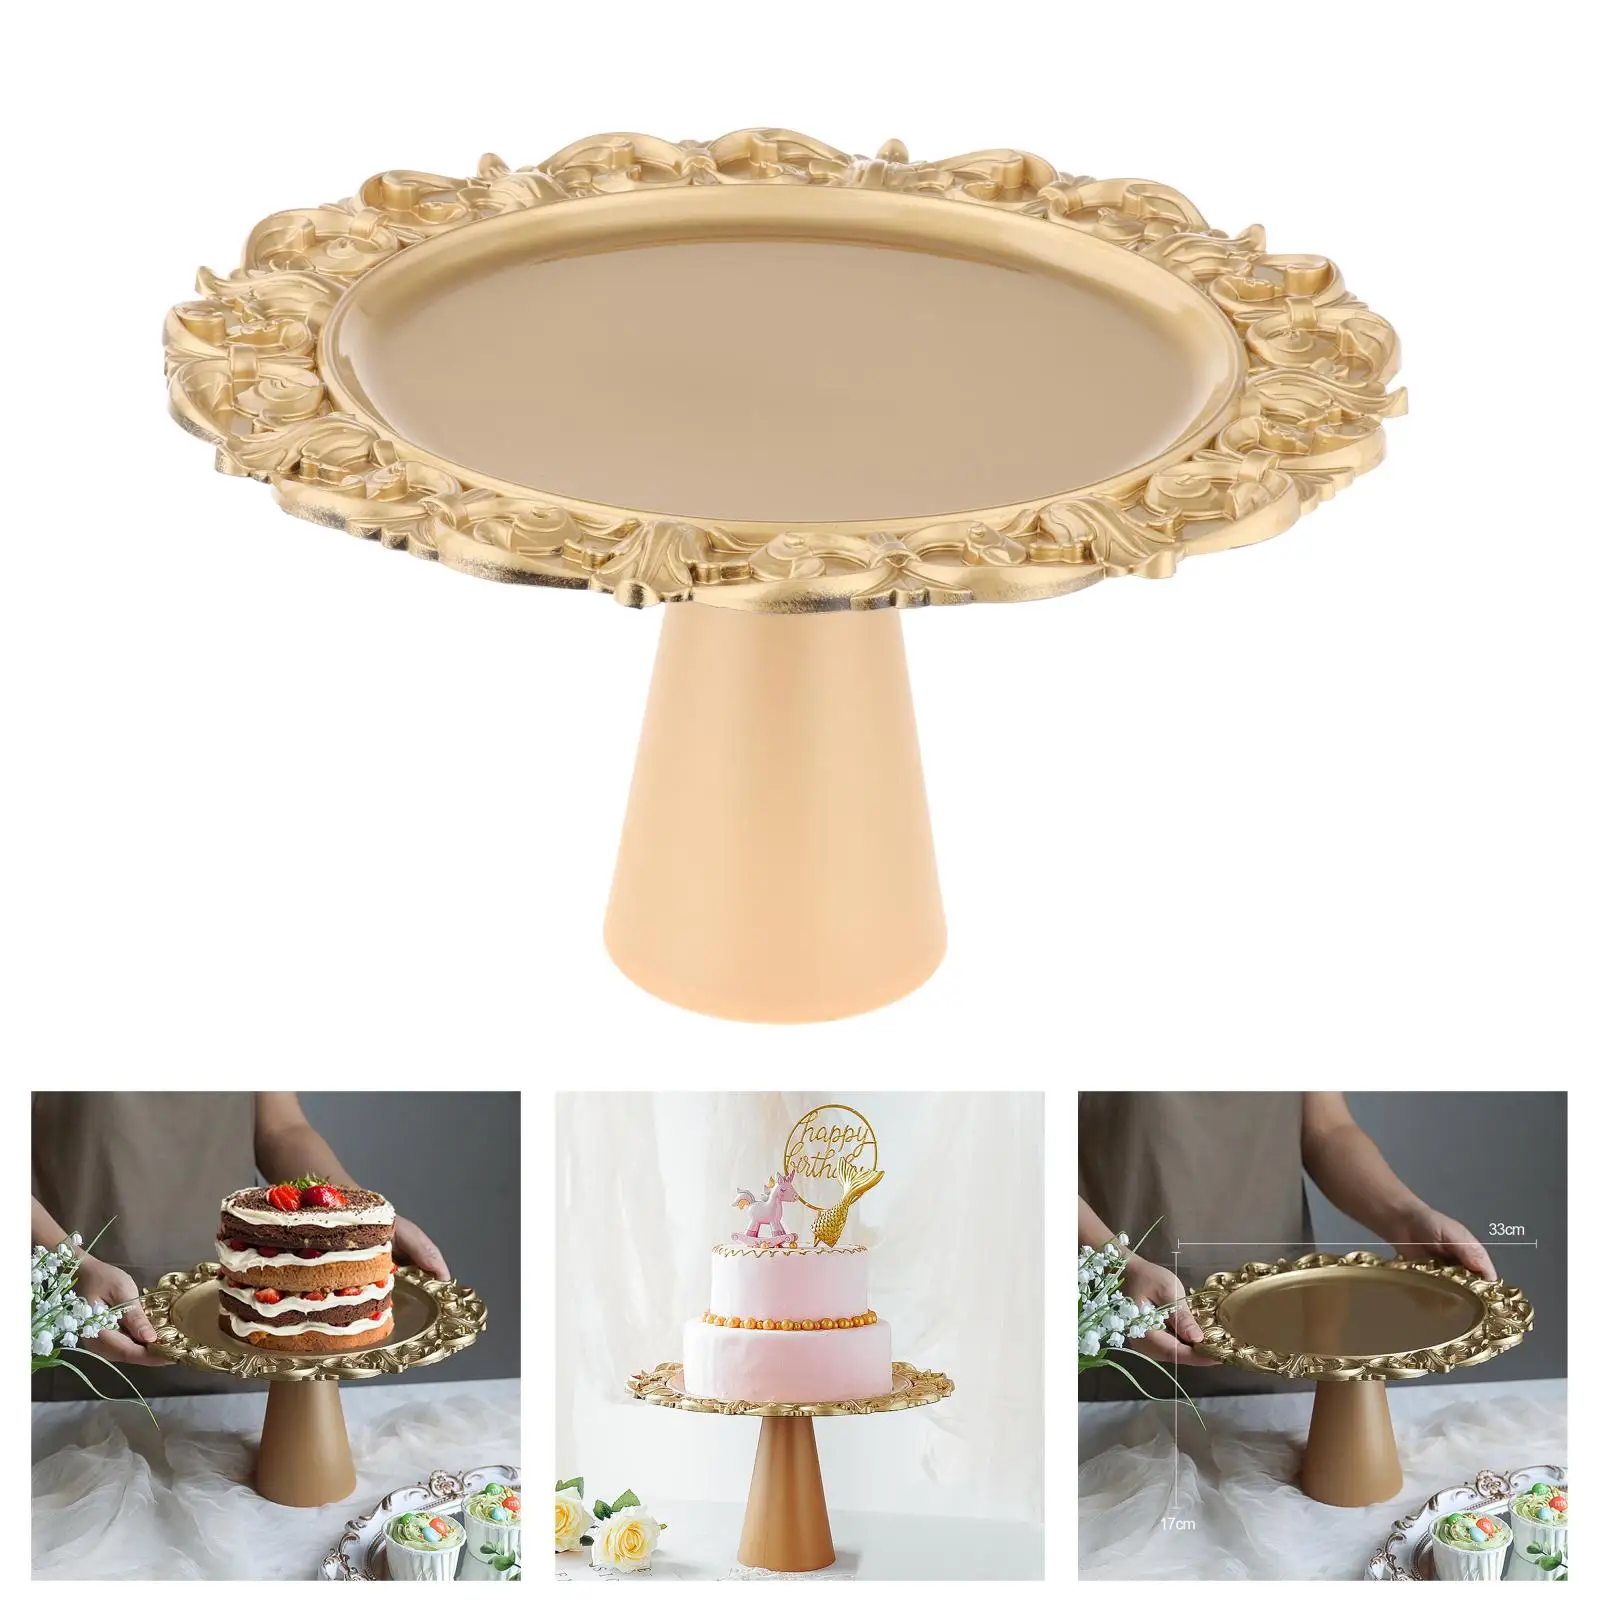 Retro 33cm Table Cake Stands Tart Pie Plate Tall Tray Kitchen Supplies